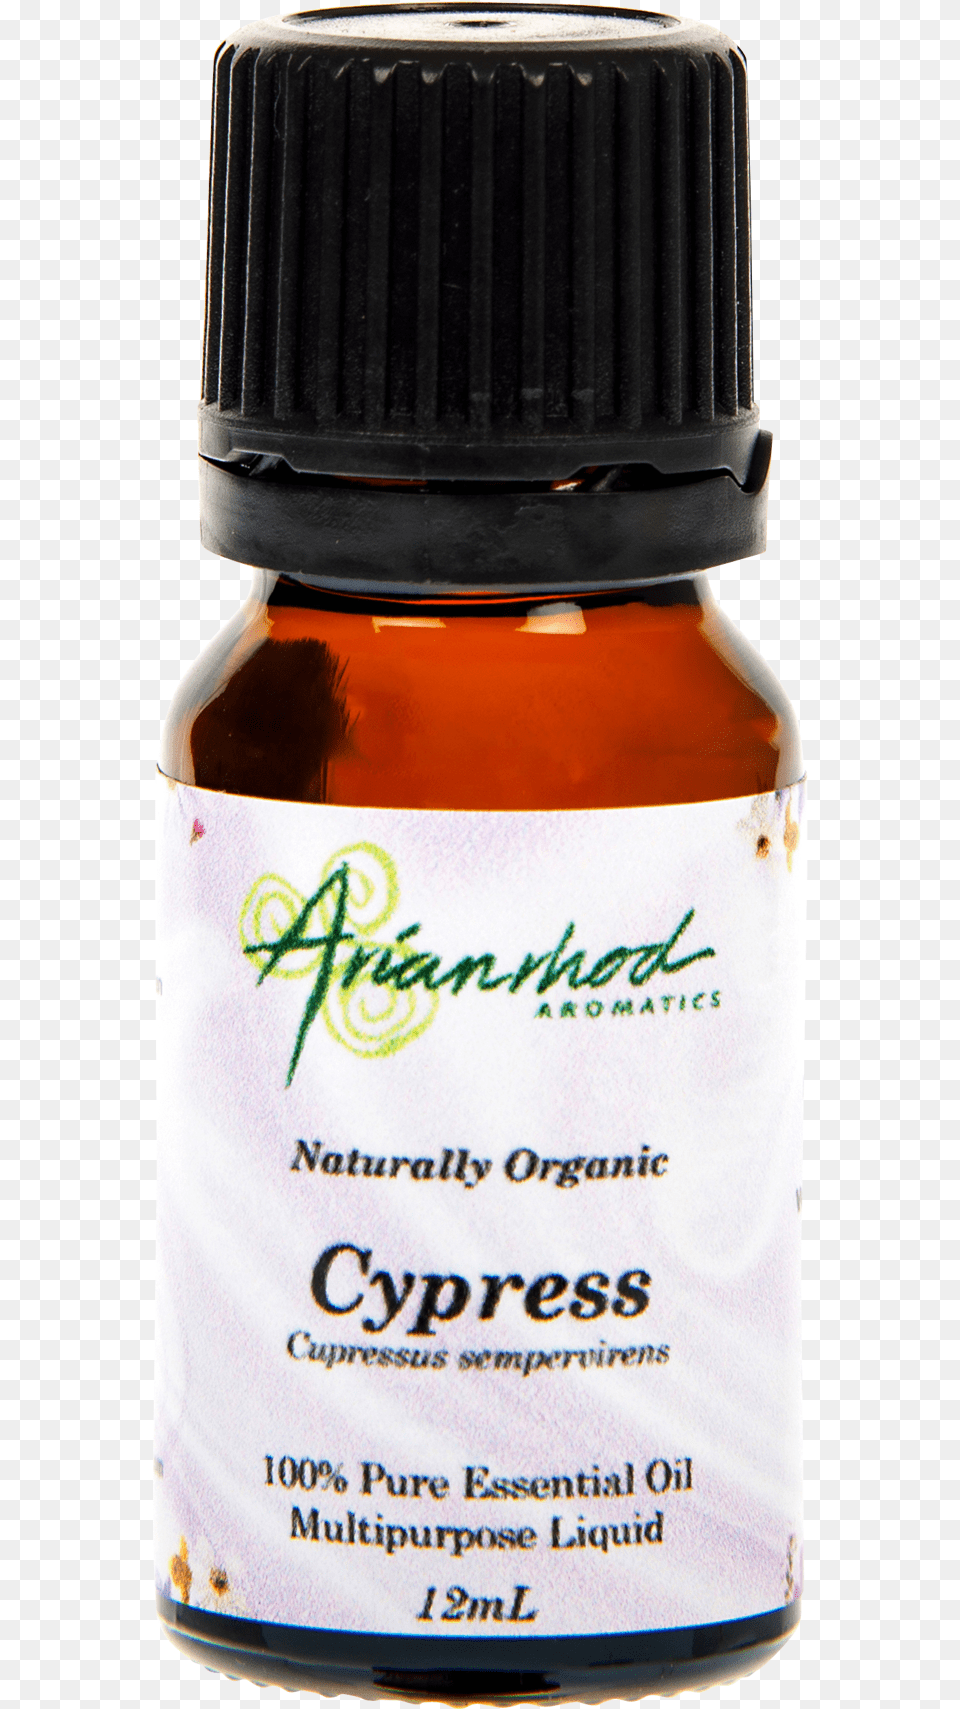 Cypress Arianrhod Aromatics, Herbal, Herbs, Plant, Bottle Png